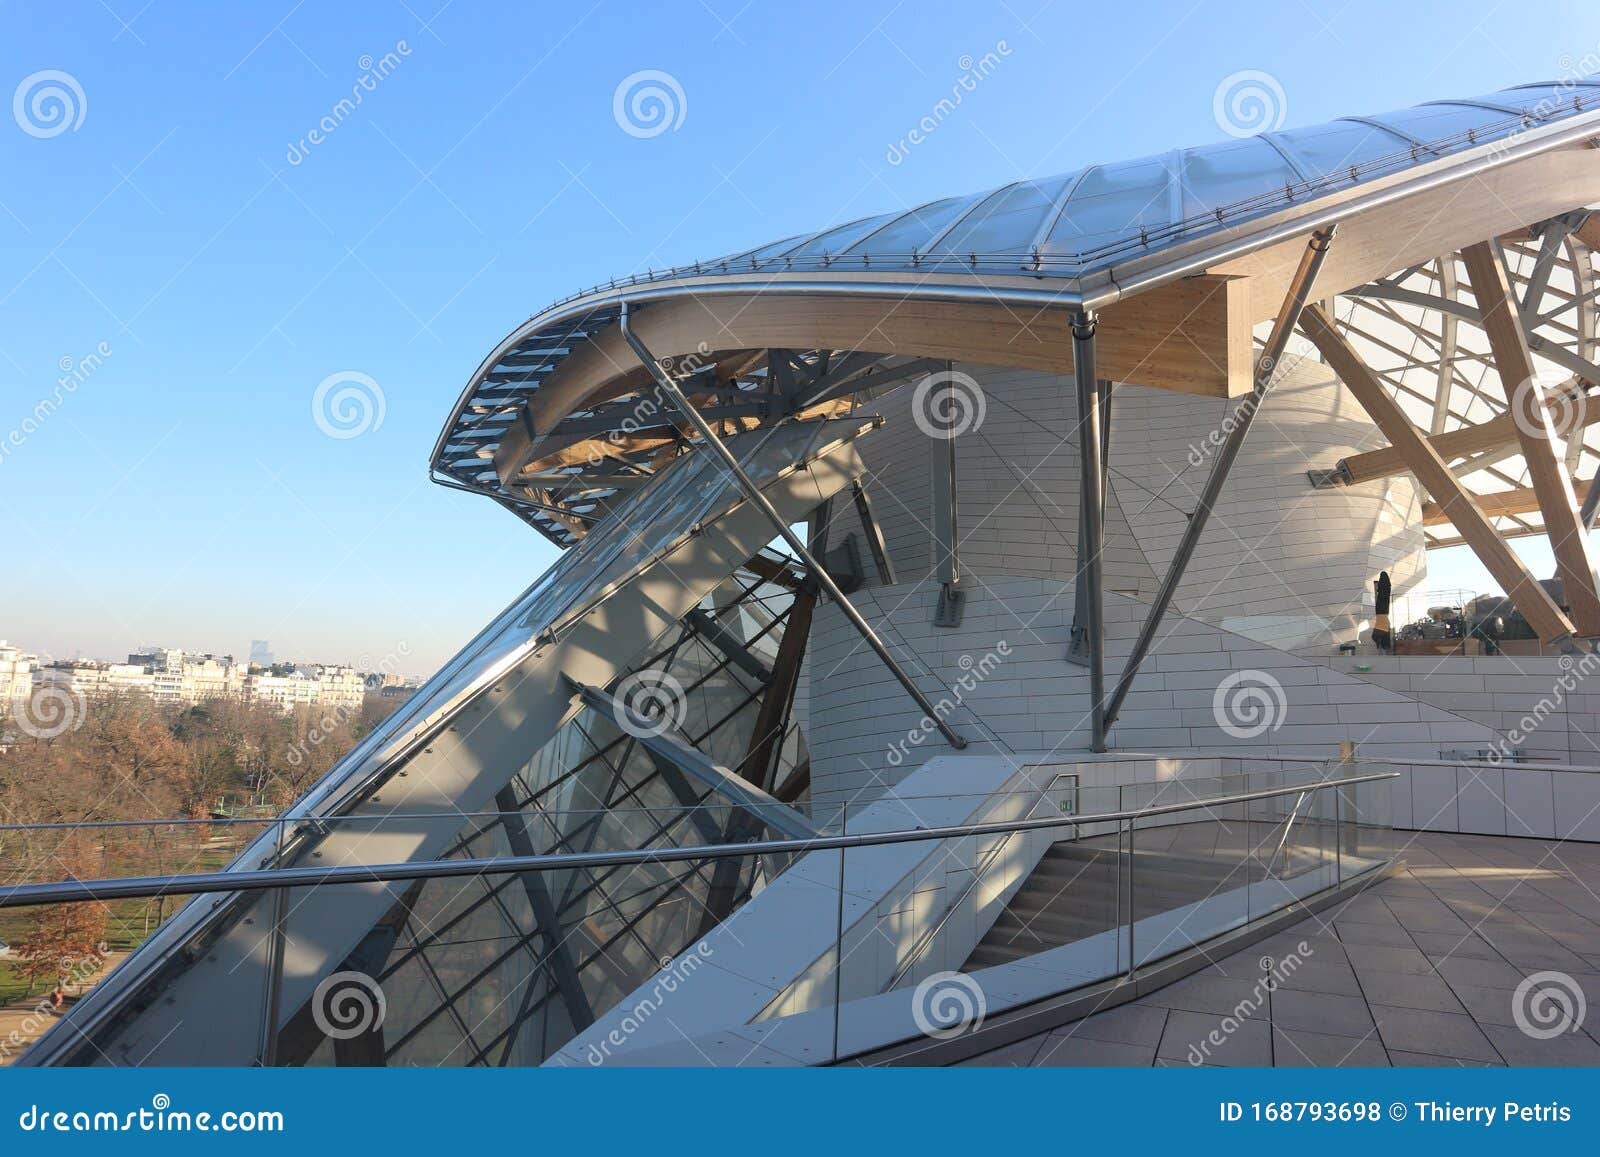 frank gehry louis vuitton foundation